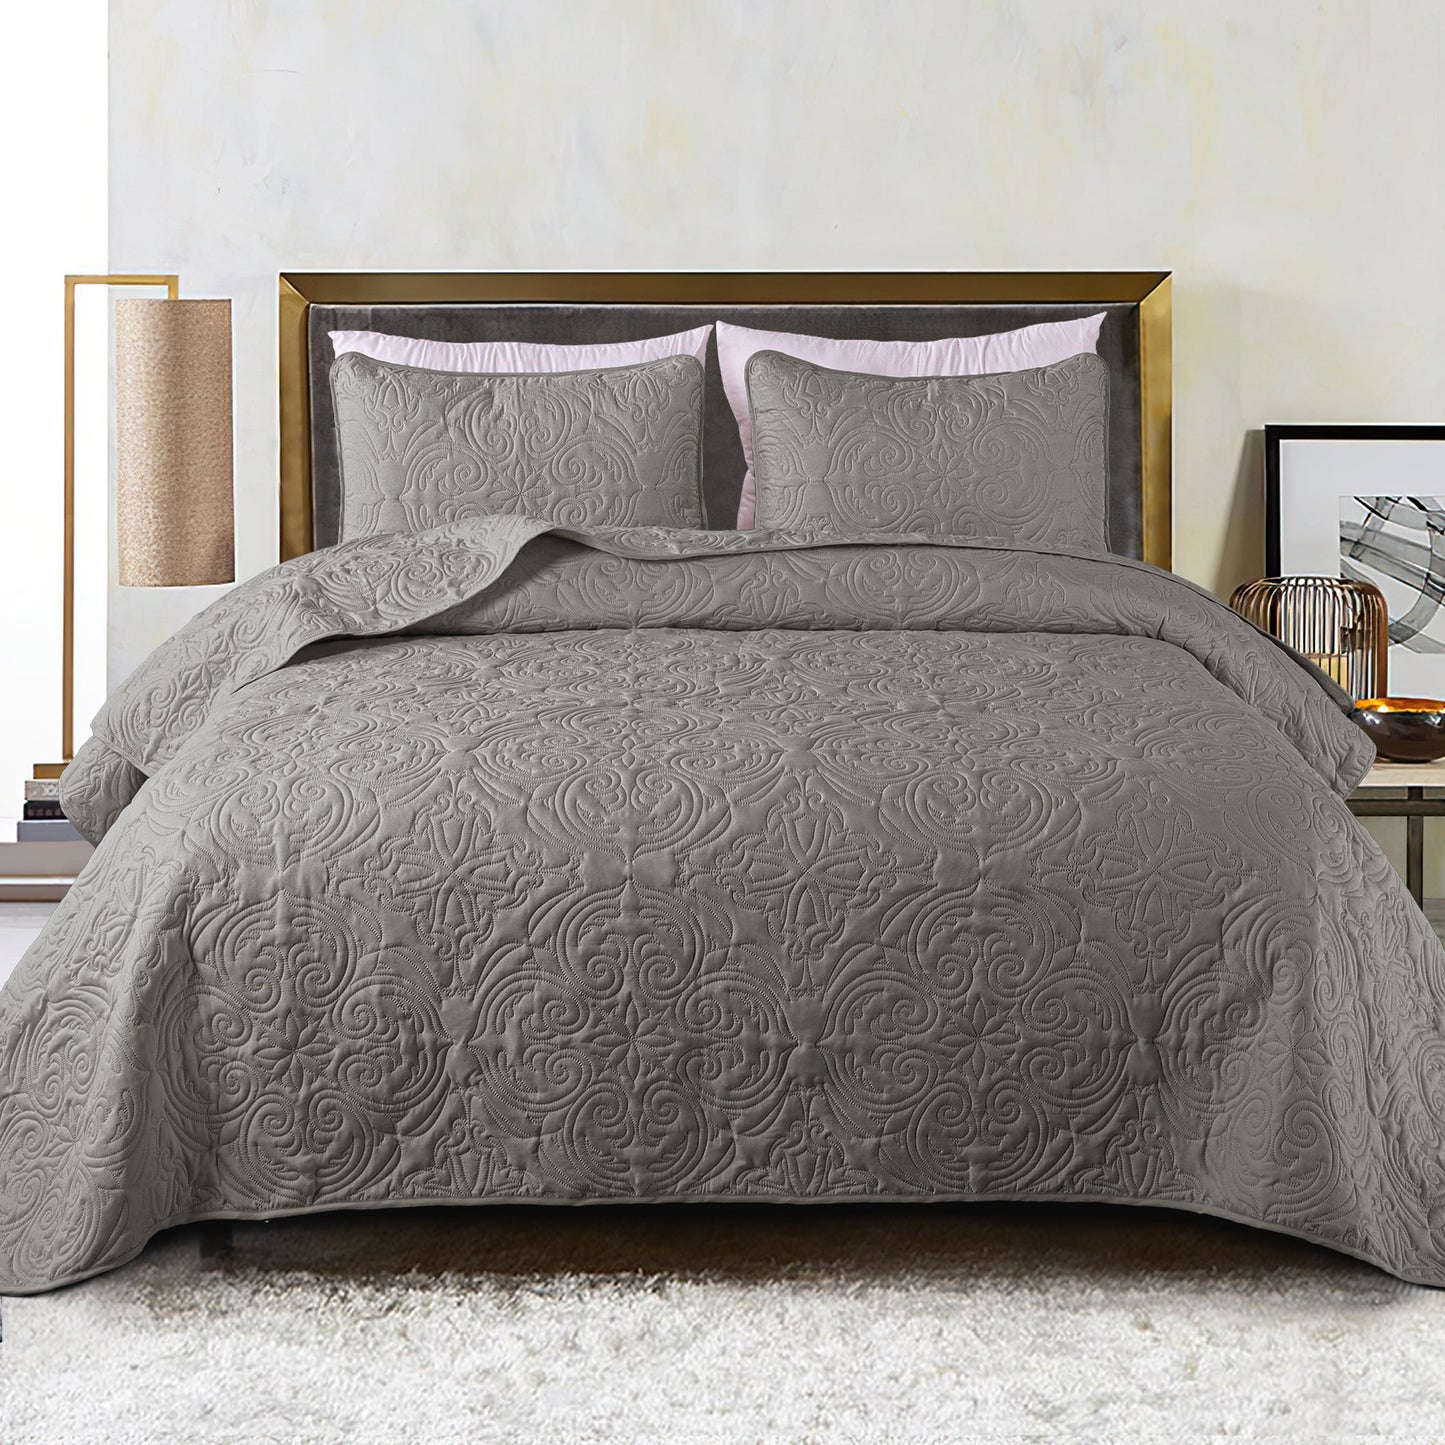 Exclusivo Mezcla Twin Quilt Bedding Set, Lightweight Vintage Twin xl Size Quilts with Pillow Sham, Soft Bedspreads Coverlets for All Seasons, (90"x68", Grey)